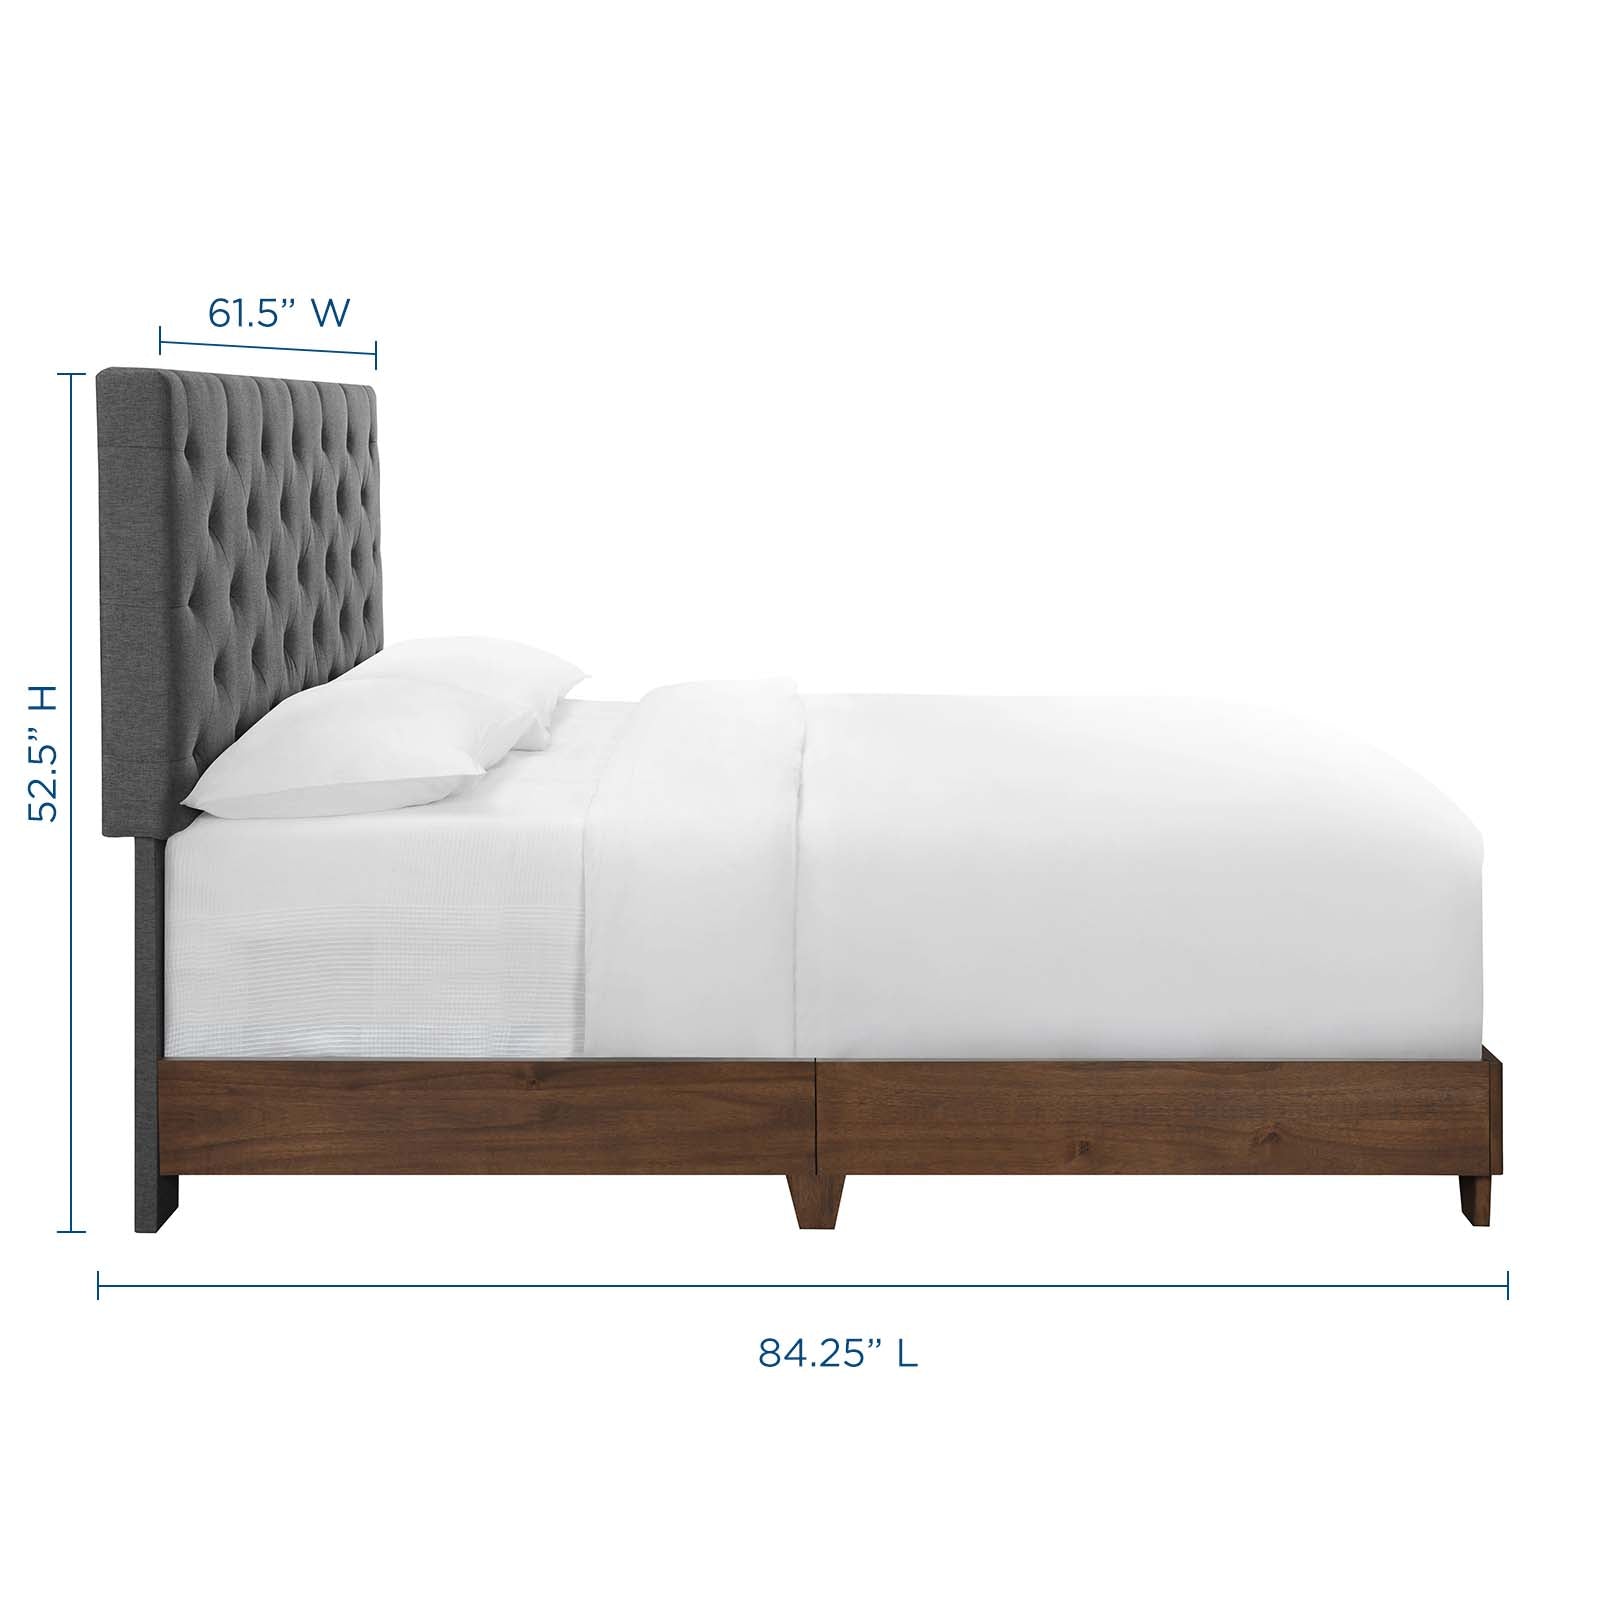 Modway Beds - Rhiannon Diamond Tufted Upholstered Fabric Queen Bed Walnut Gray